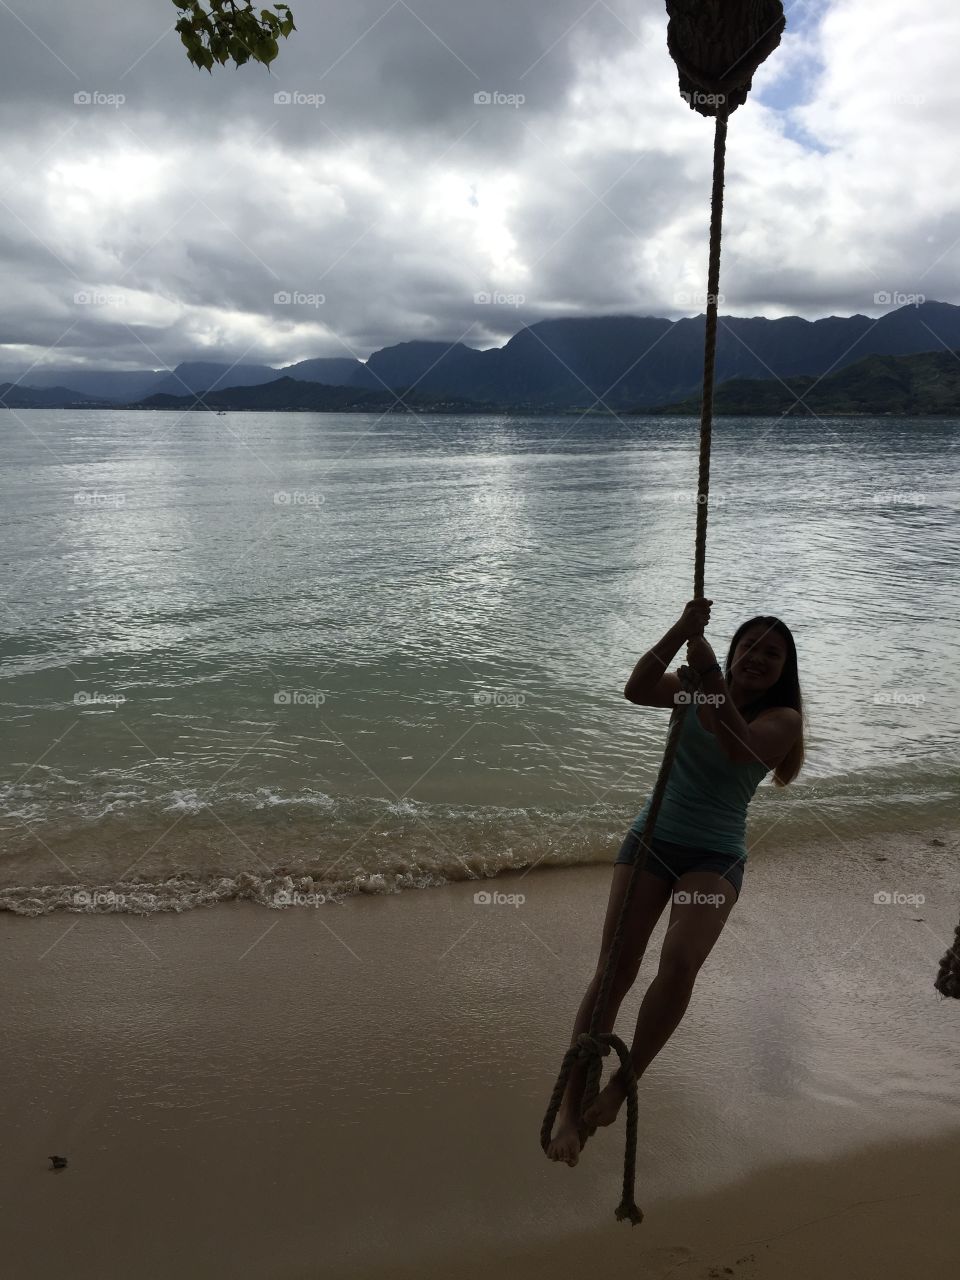 Girl on rope swing at beach